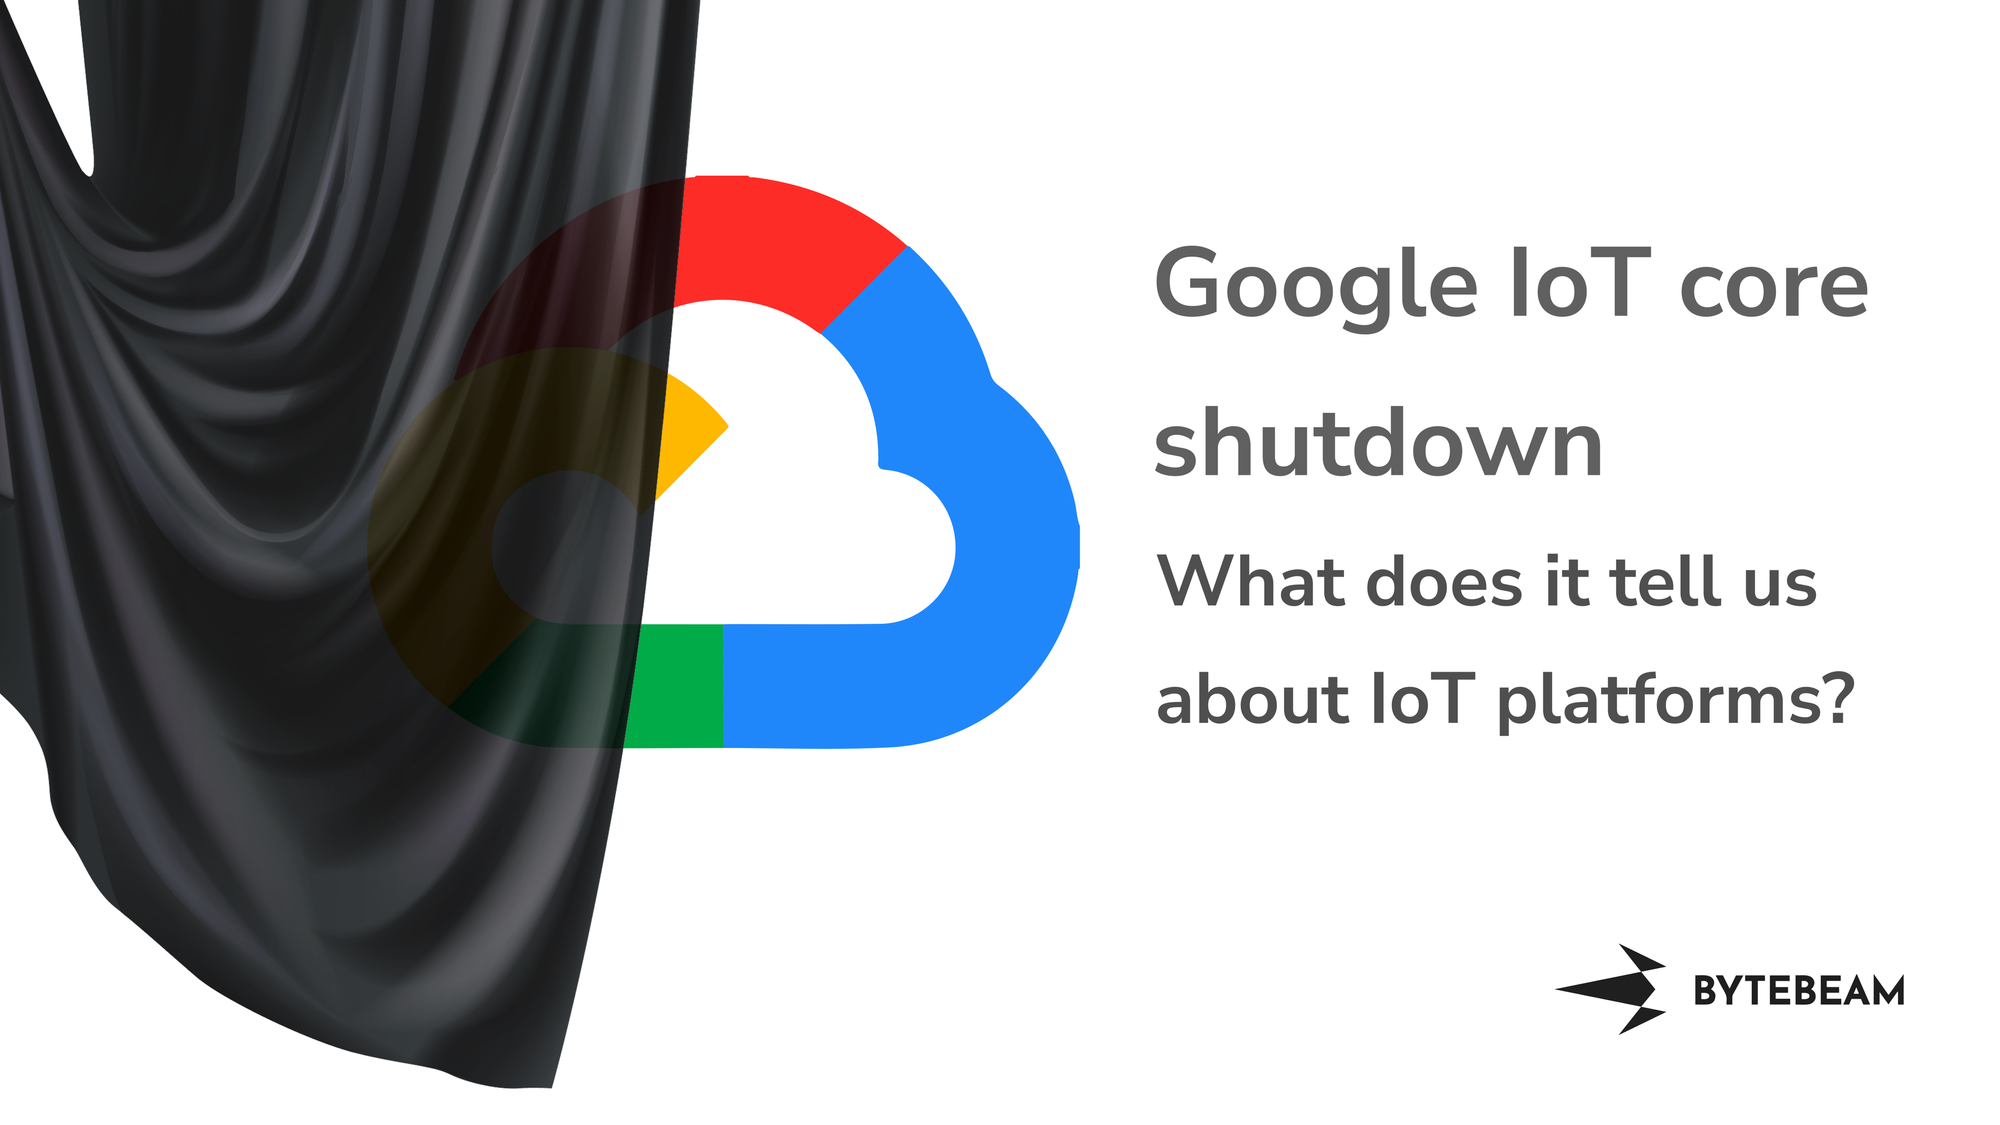 What does the Google IoT core shutdown tell us about IoT platforms?